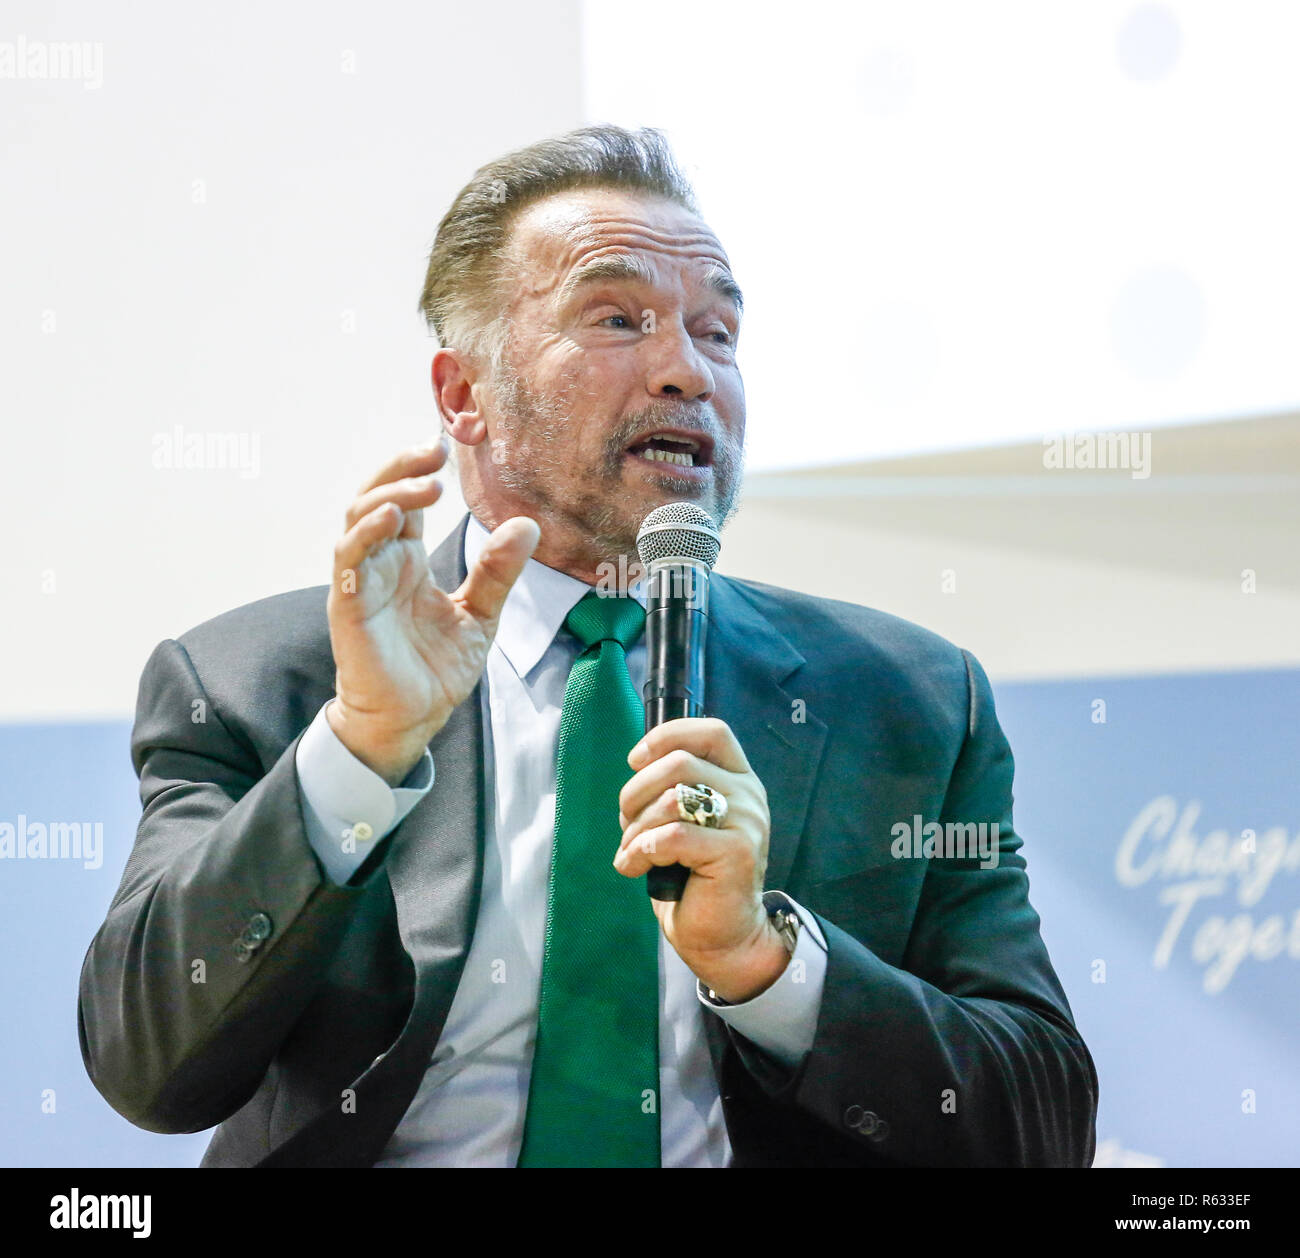 Katowice, Poland. 3rd December, 2018. Arnold Schwarzenegger, USC Schwarzenegger Institute Chair and ex-Governor of California during the Action Hub Opening panel at the COP24 Katowice, Poland on the 3rd of December 2018. COP24 is organized by UN Framework Convention for Climate Change (UNFCCC). Credit: Michal Busko/Alamy Live News Stock Photo